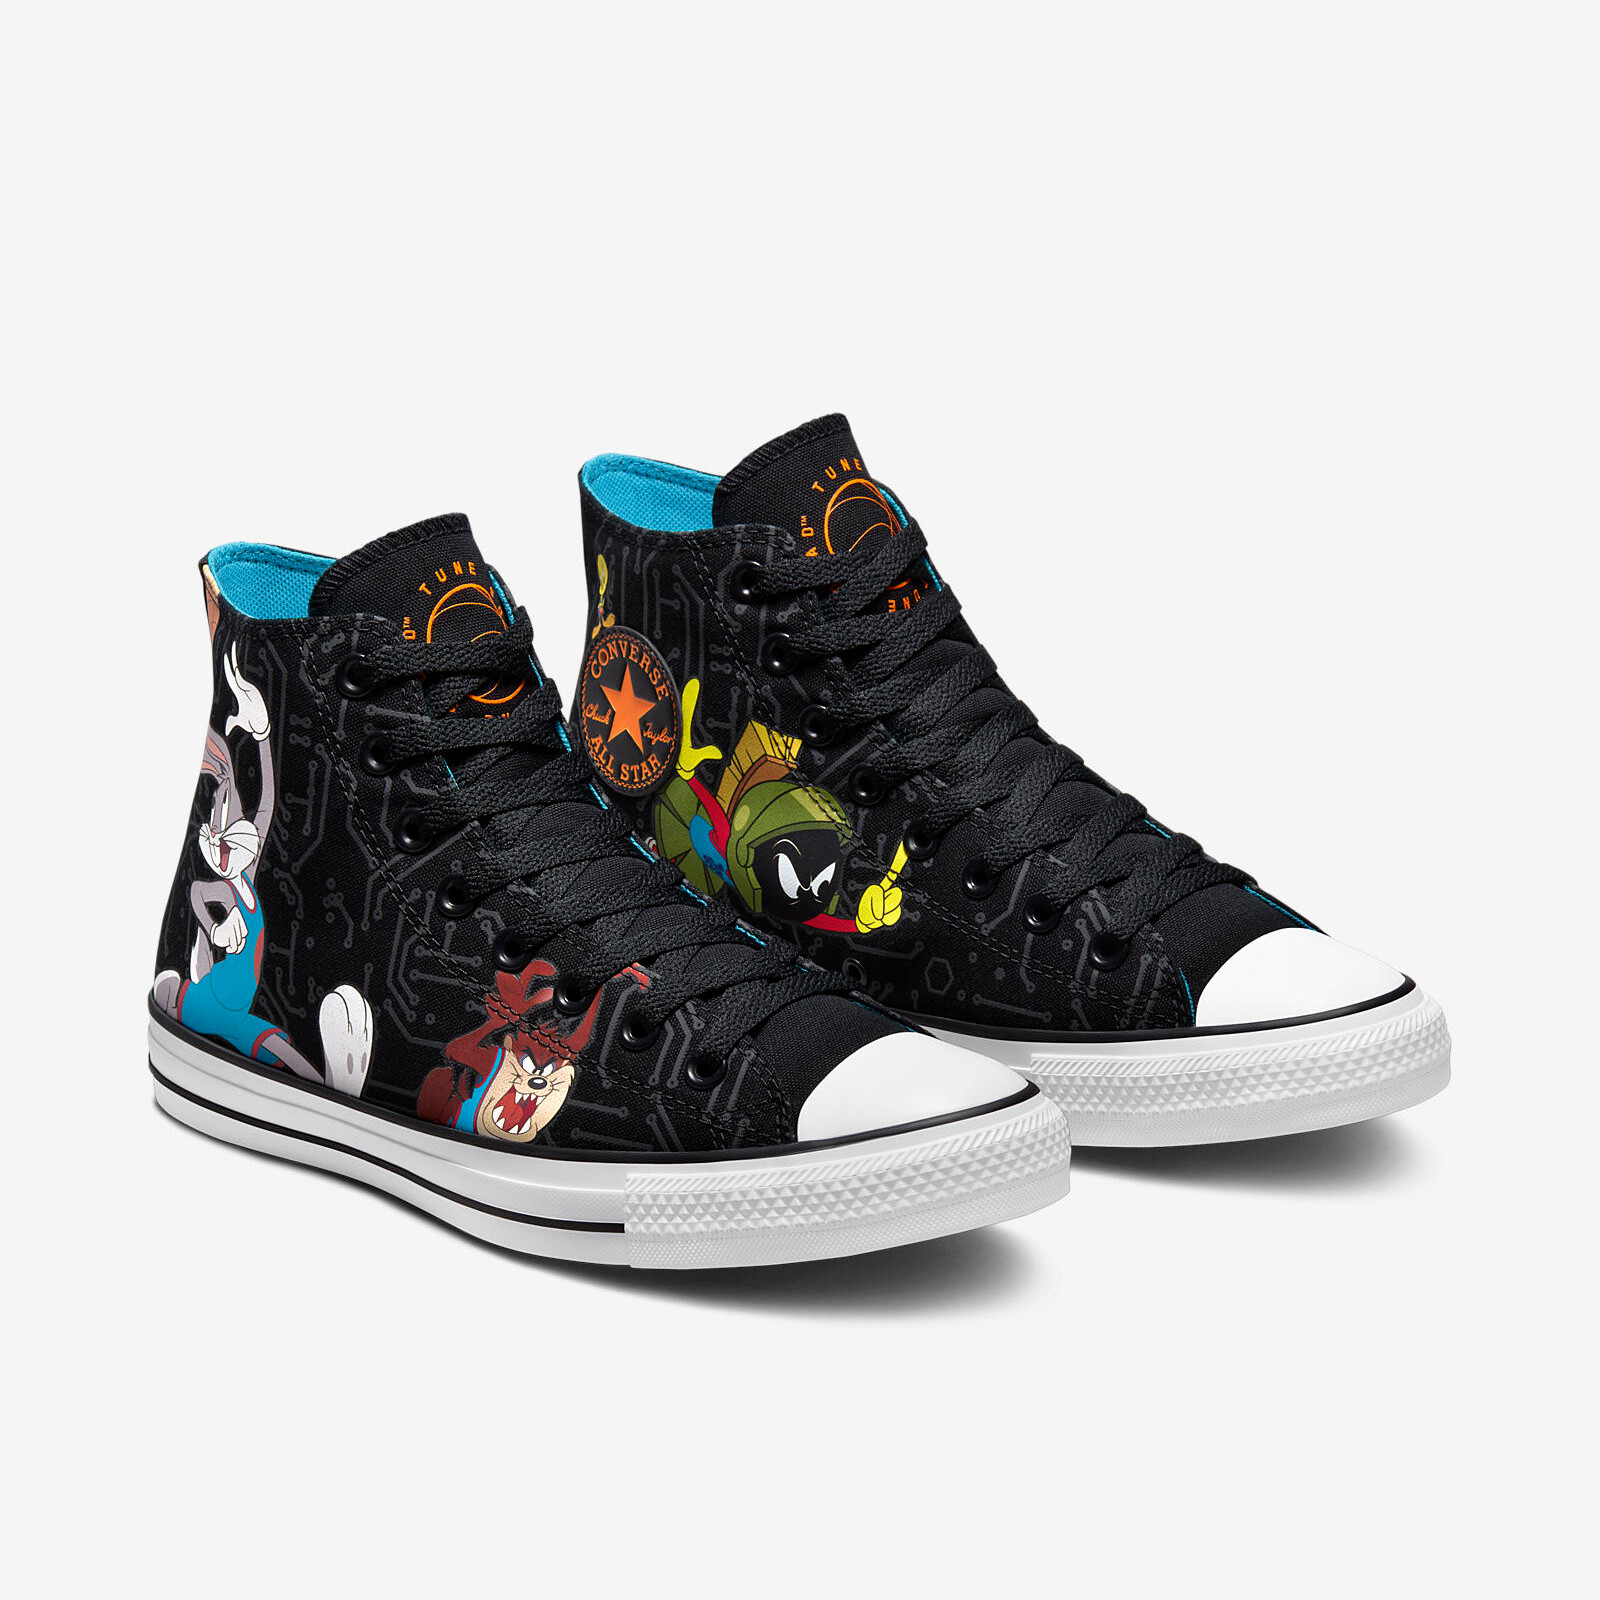 Converse x Space Jam
A New Legacy
Chuck Taylor All Star